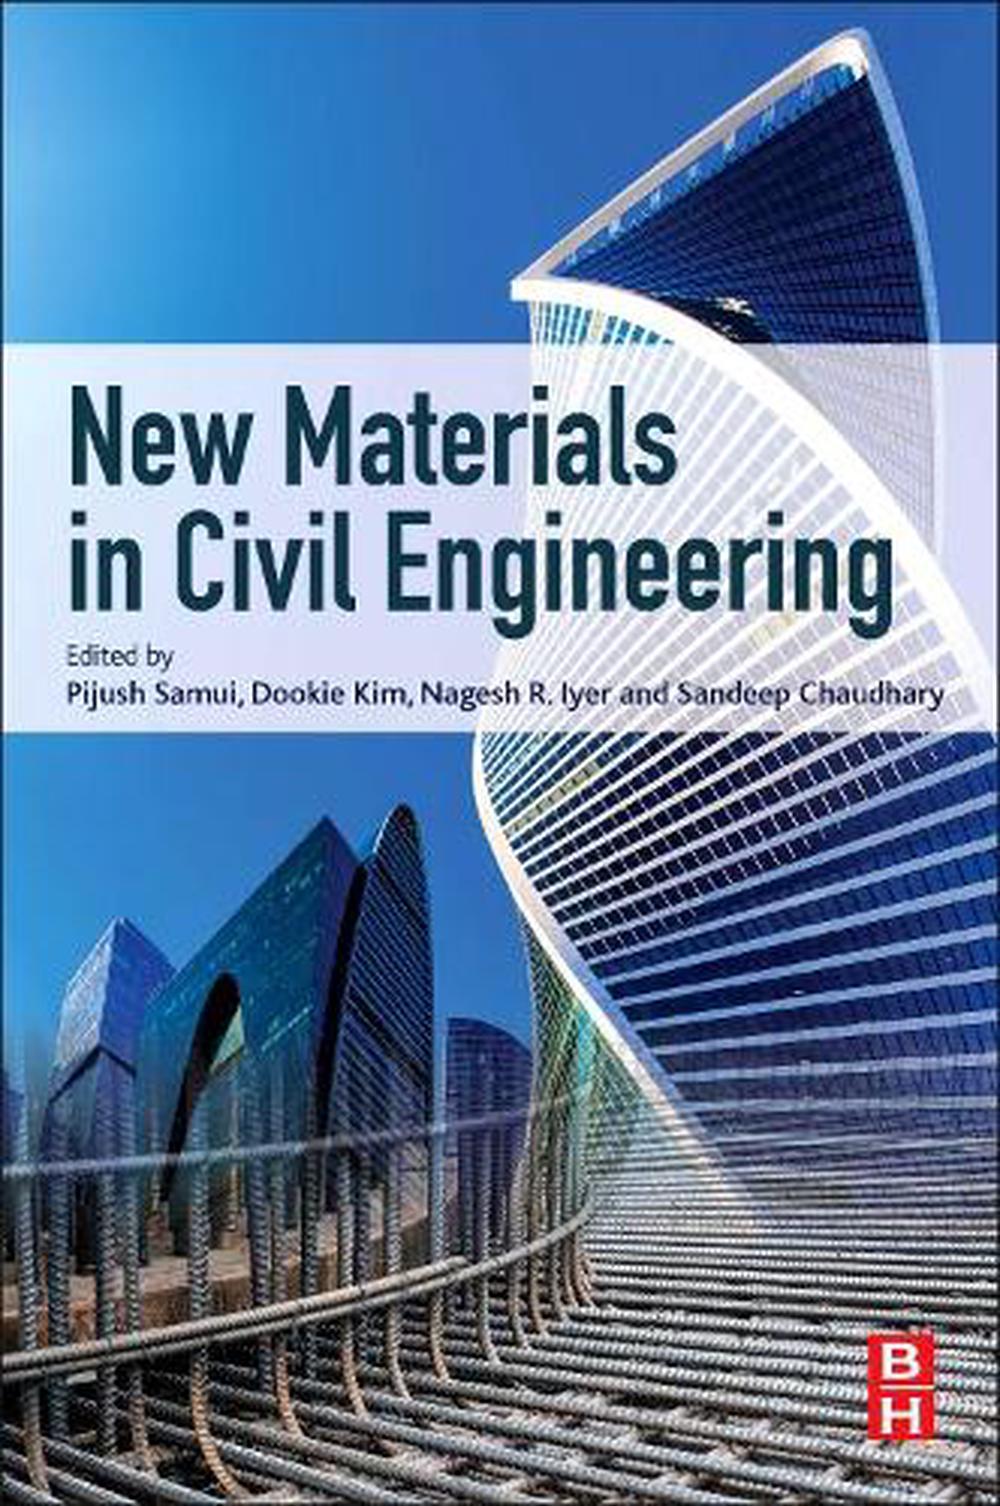 New Materials in Civil Engineering (English) Paperback Book Free